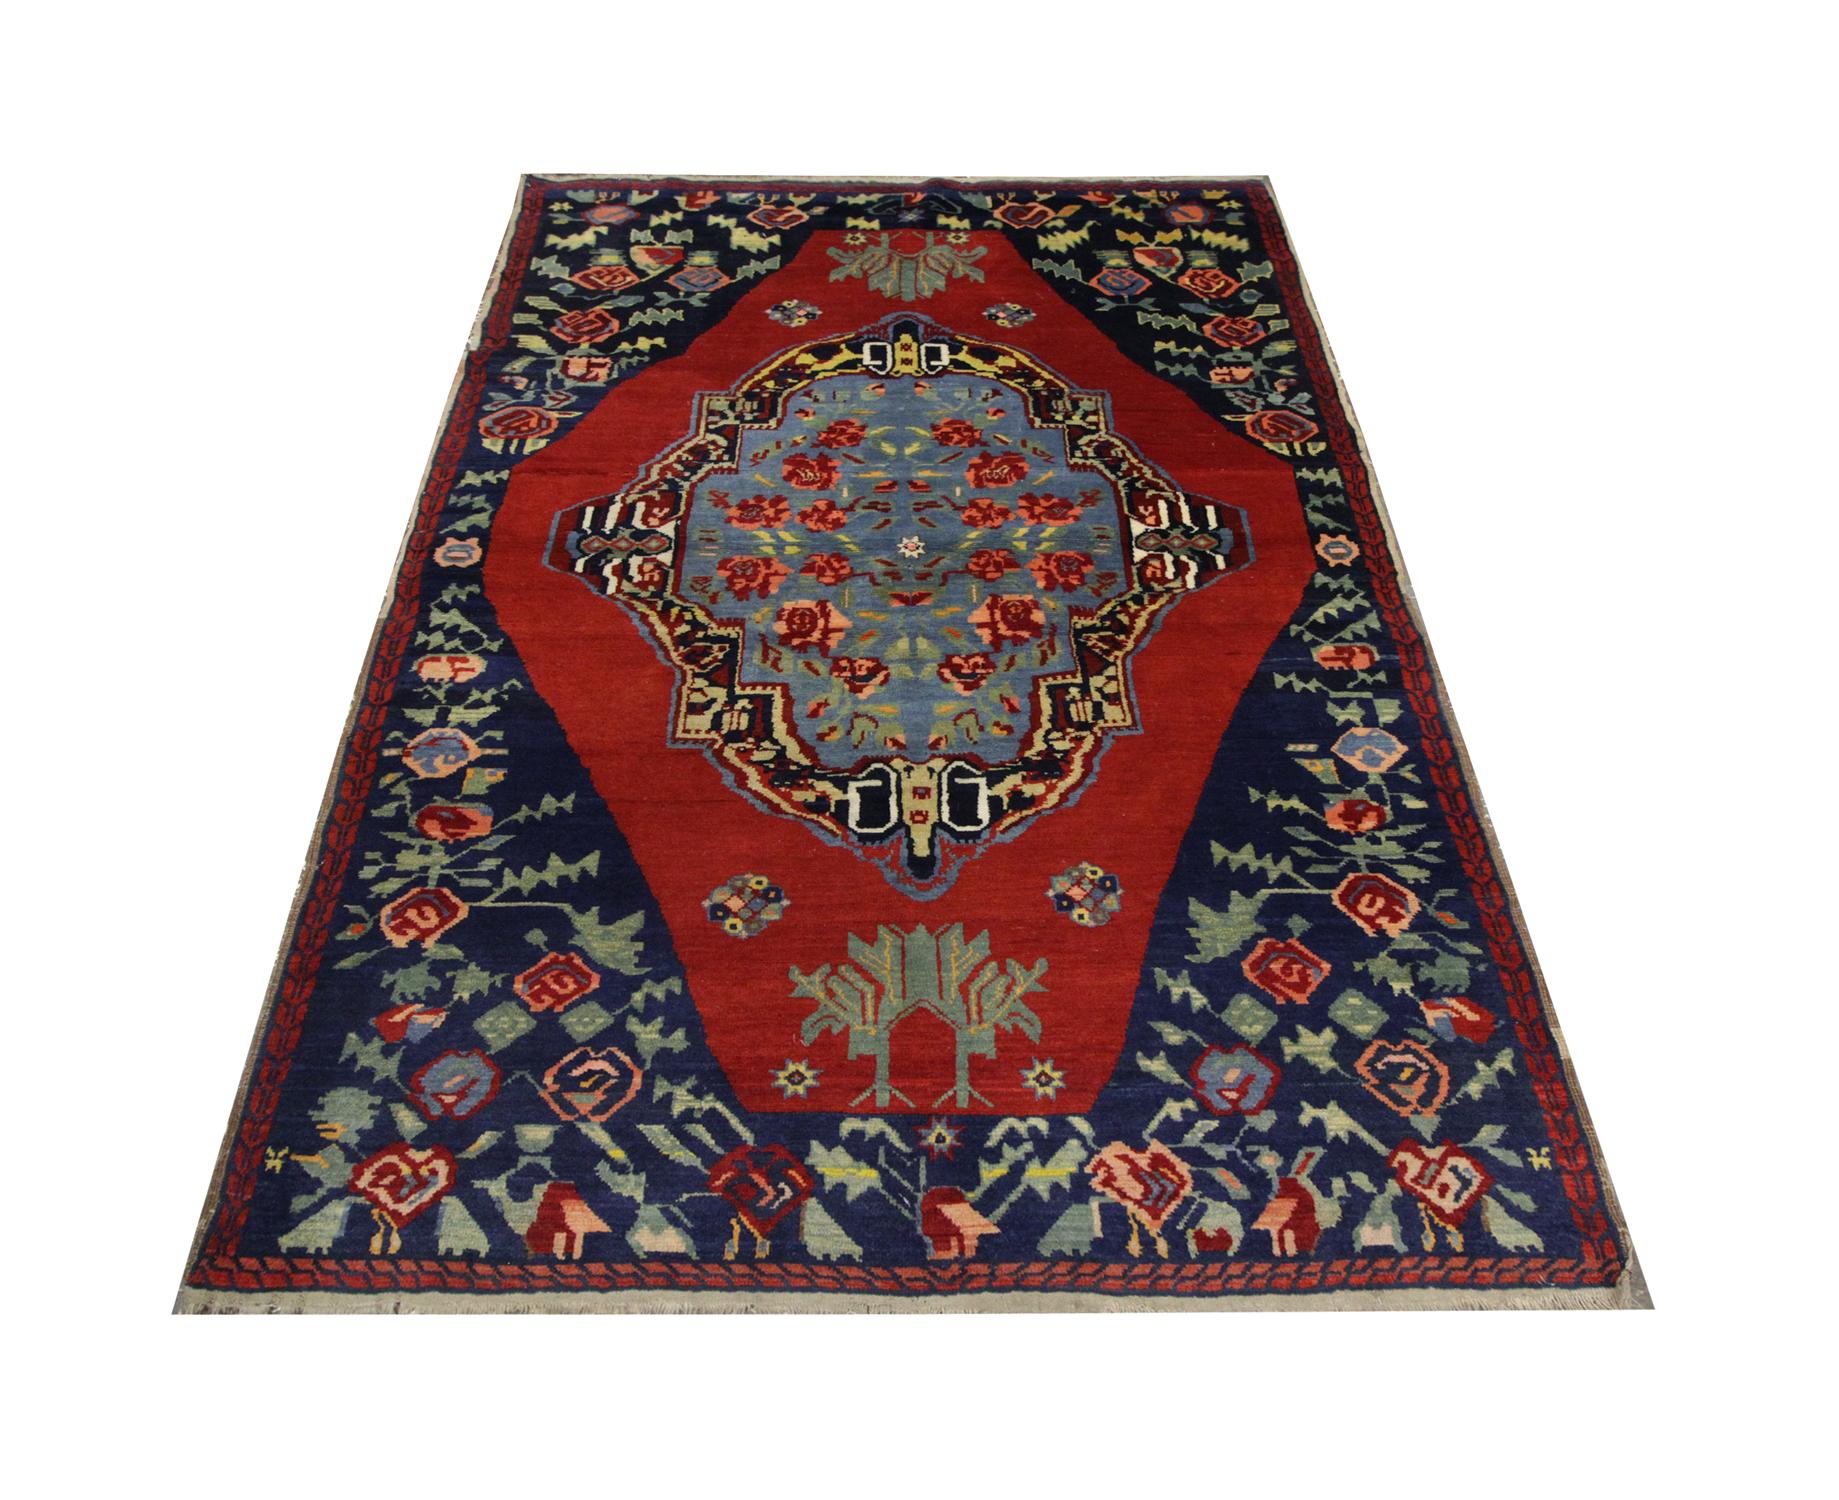 An oriental rug with beautiful blue pool fills the central medallion with floating roses. This handmade carpet is enclosed by a deep red background and further floral motifs through the border.
This high-quality Karabagh rug is perfect for both